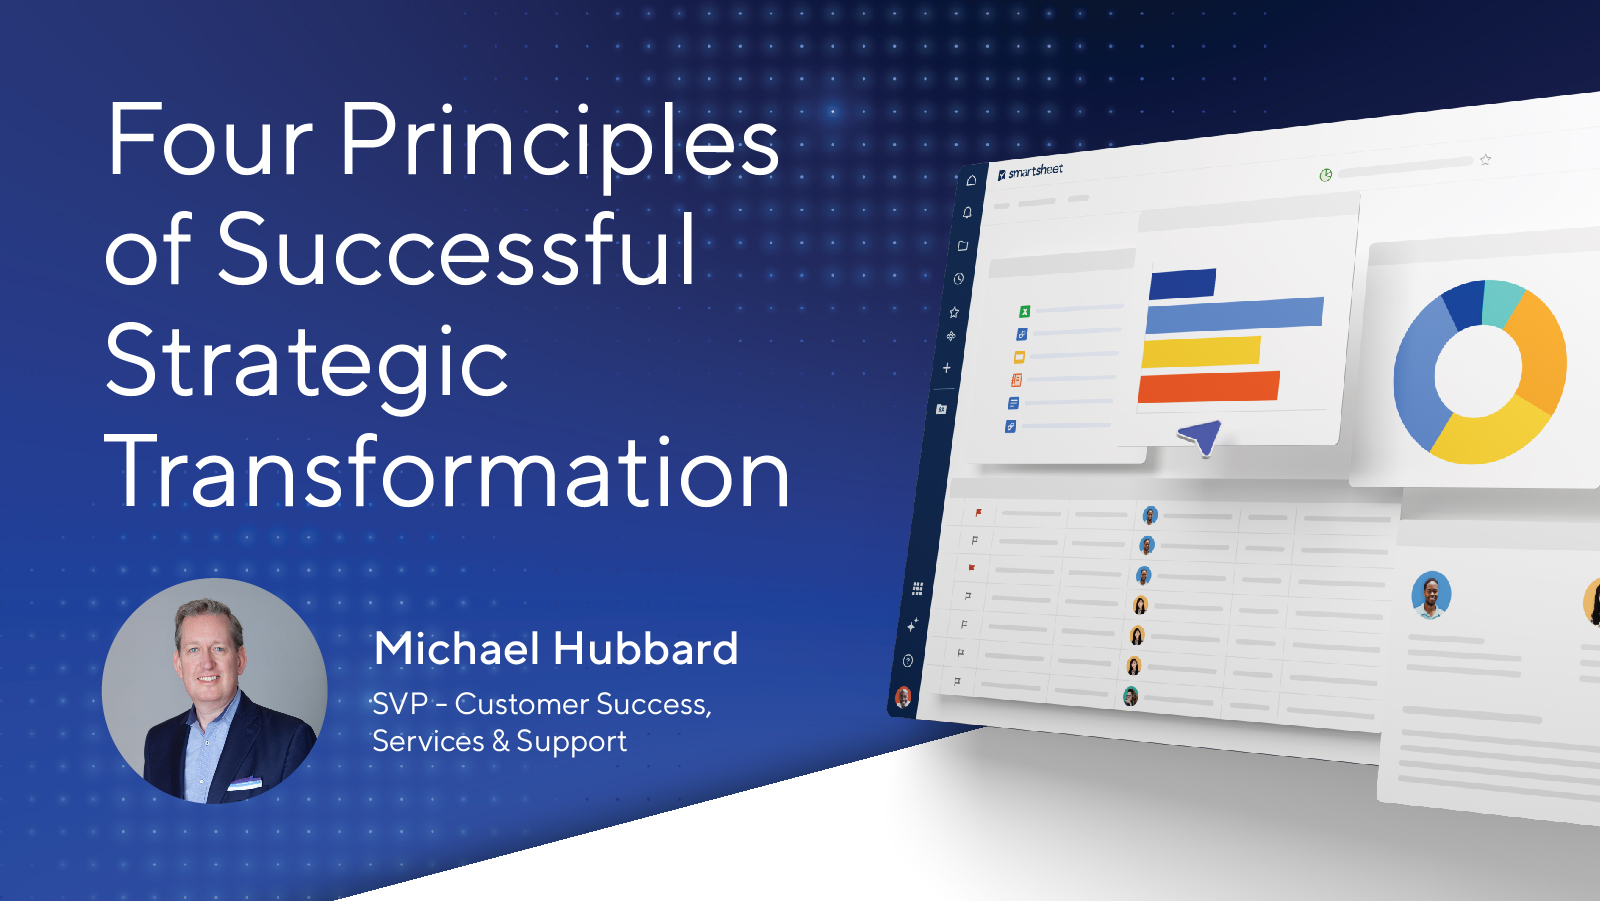 Four principles of successful strategic transformation by Michael Hubbard